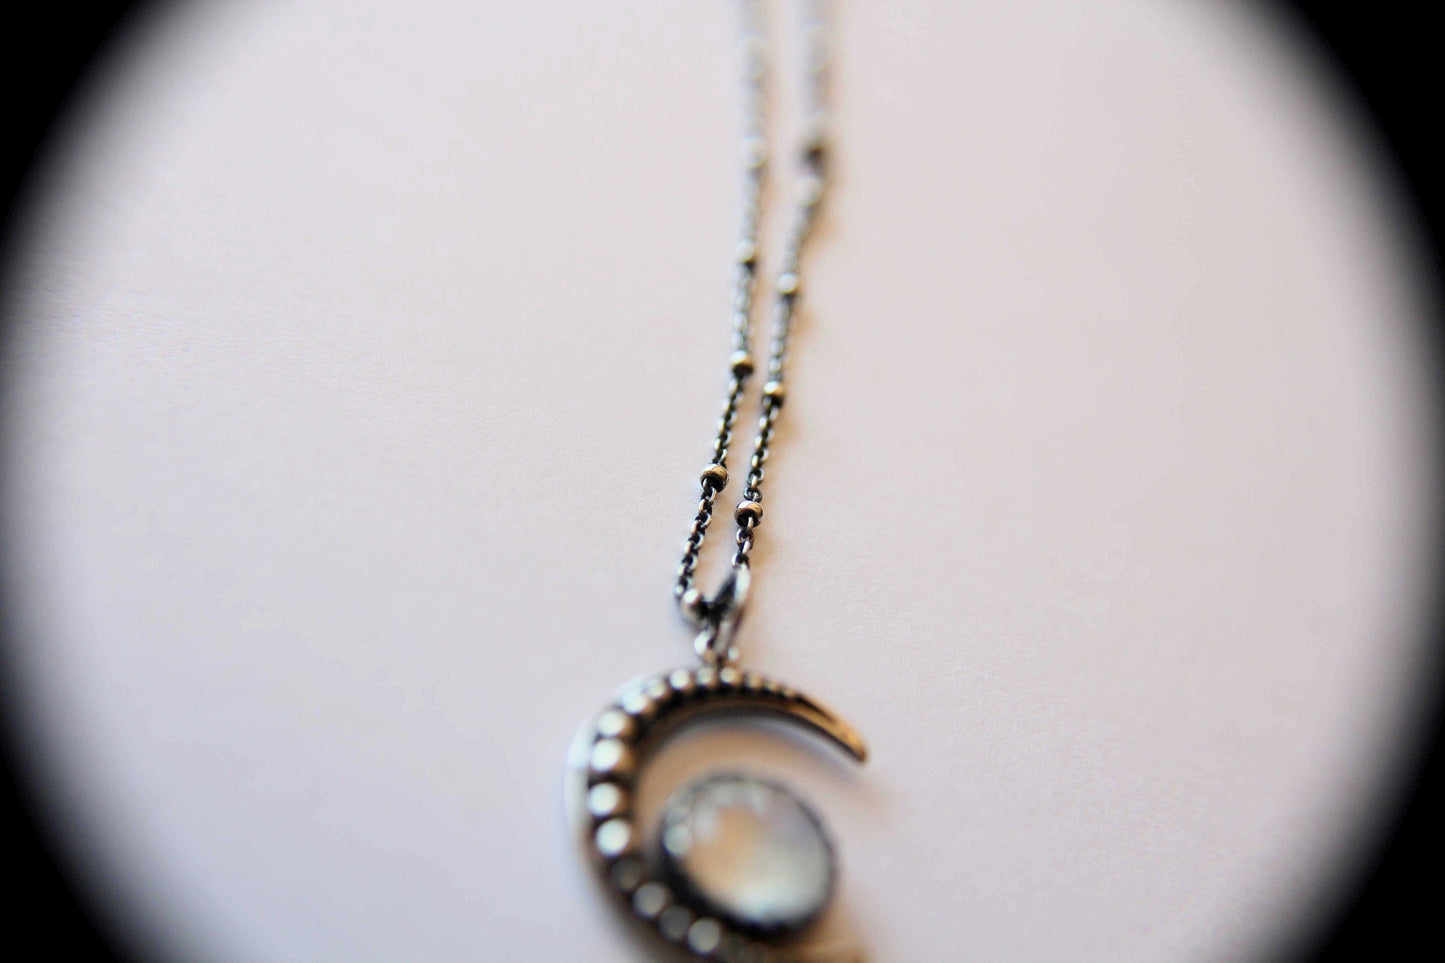 Crescent Moon Necklace, Moonstone Necklace, Silver Crescent Moon Necklace, Crescent Moon Jewelry, Moonstone Jewelry, Moon Child, Gift